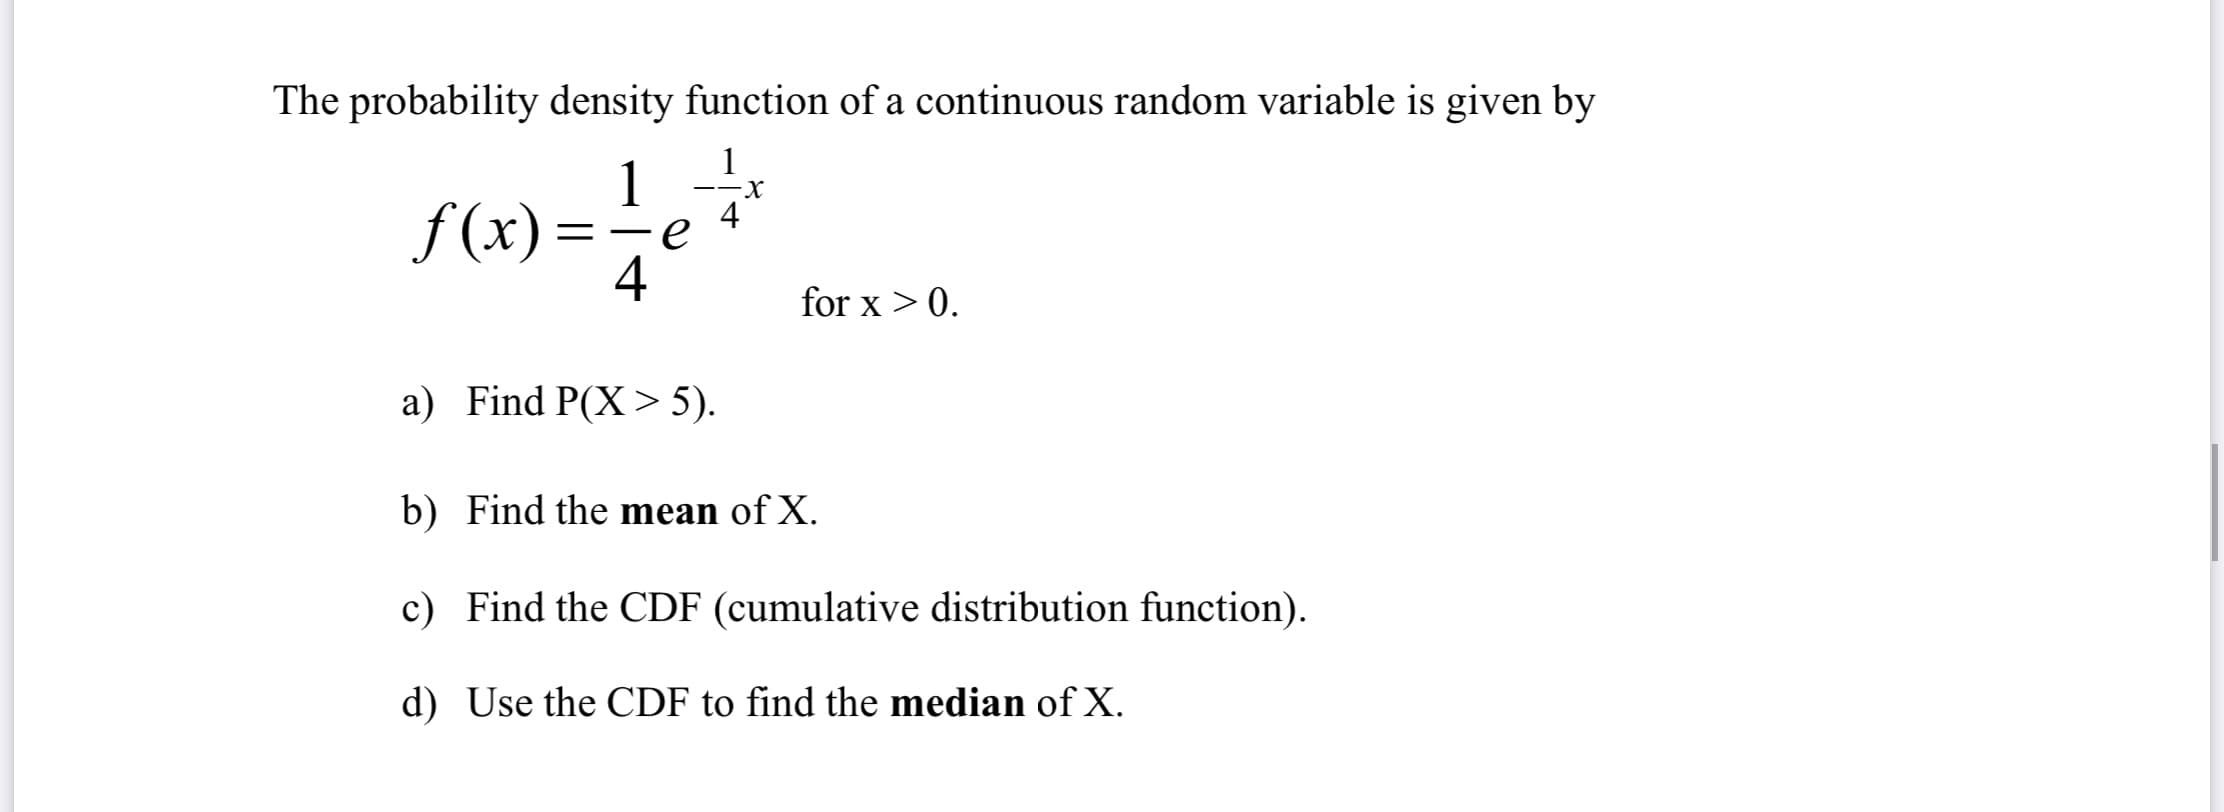 The probability density function of a continuous random variable is given by
1
1
4
f (x) =
-
4
for x > 0.
a) Find P(X> 5).
b) Find the mean of X.
c) Find the CDF (cumulative distribution function).
d) Use the CDF to find the median of X.
